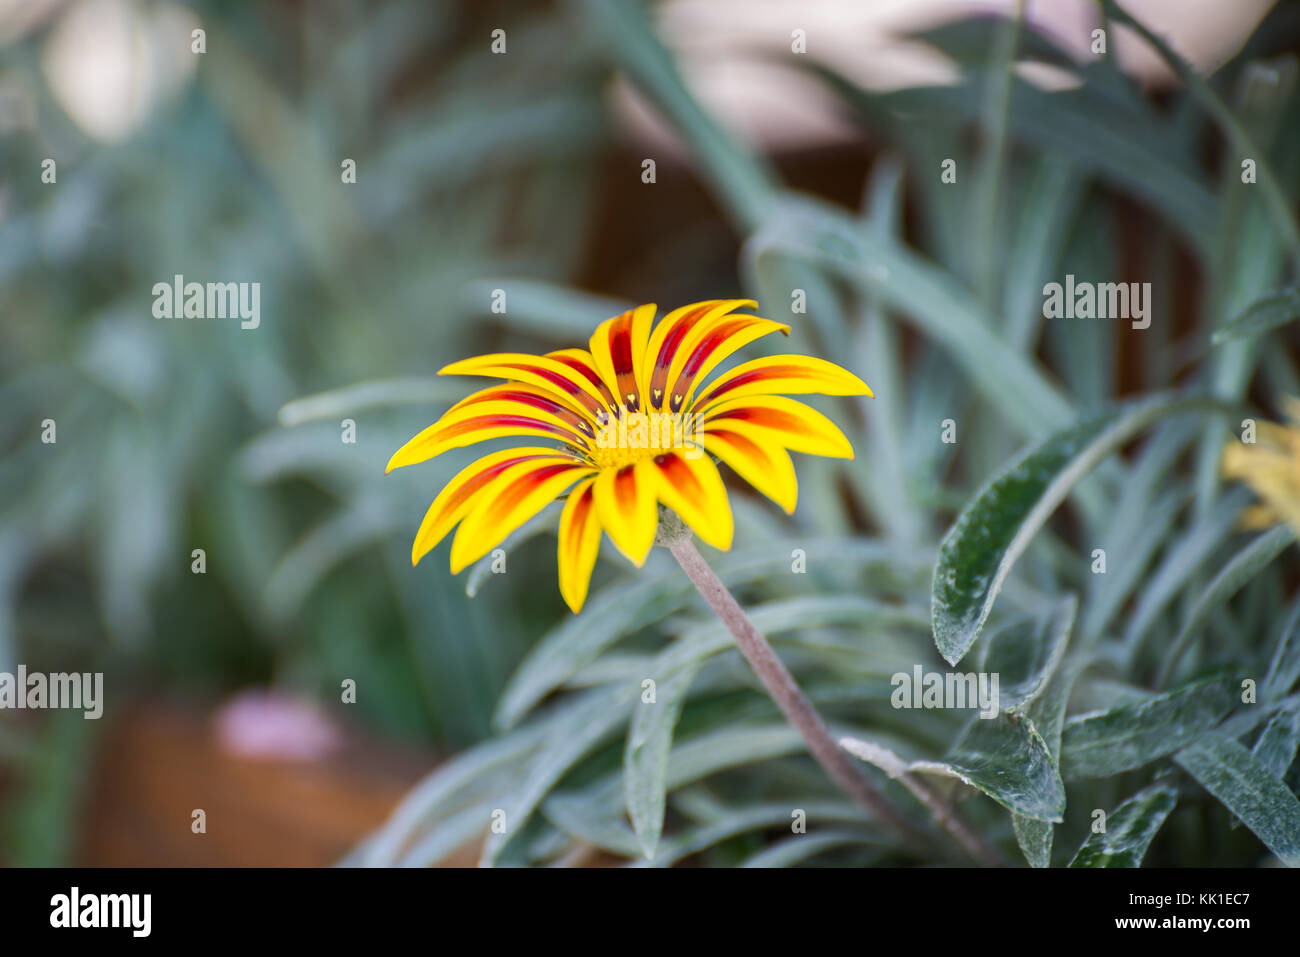 Yellow Red Striped Gerber Daisy Flower Stock Photo